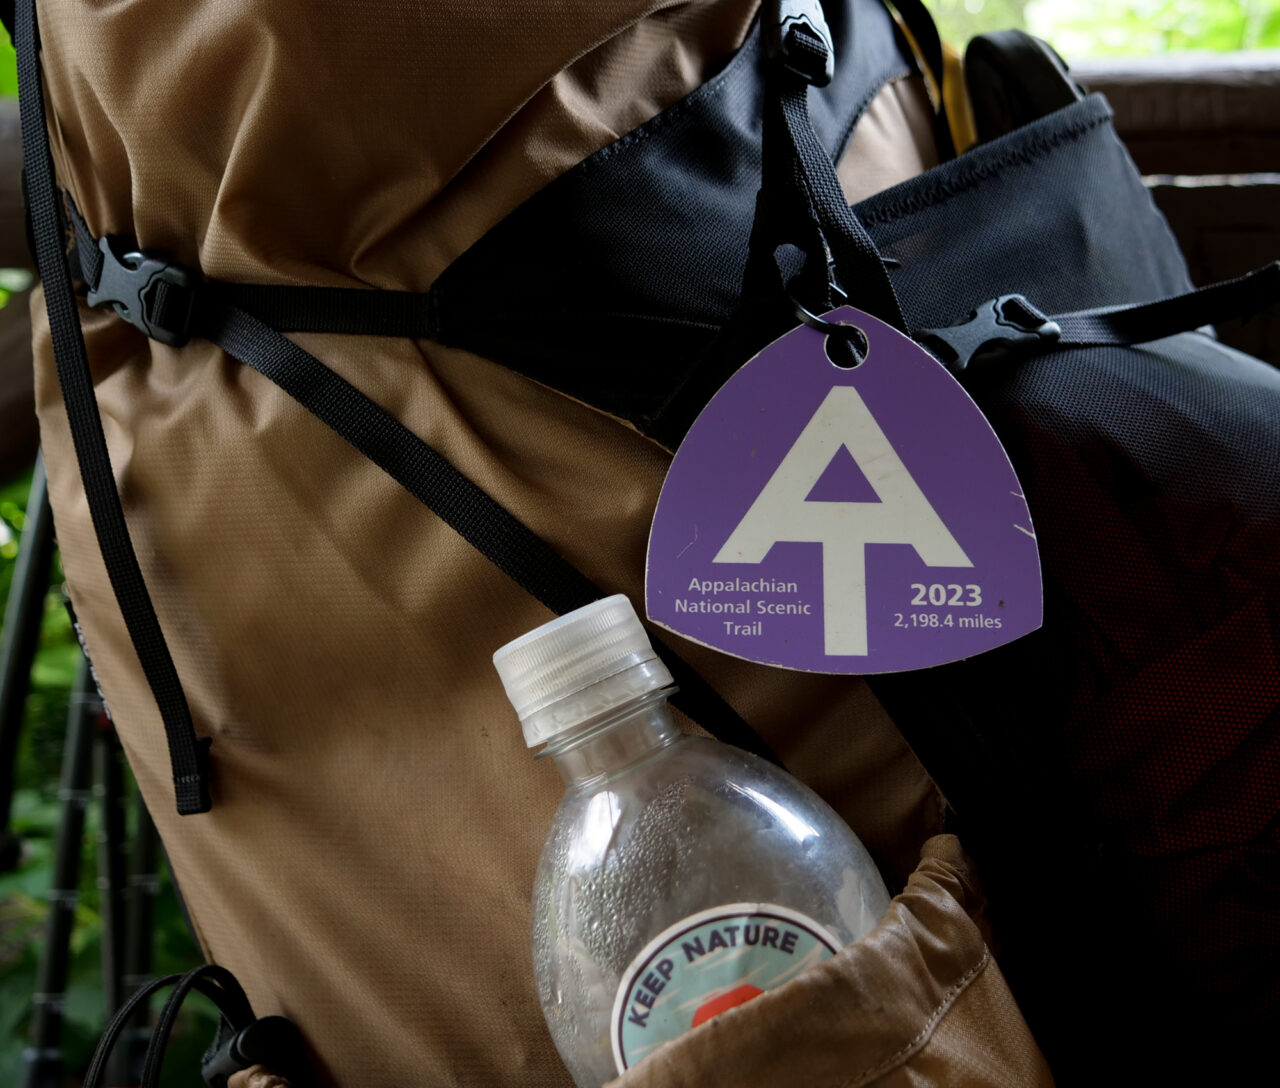 Austin "Fun Facts" Miller, 27, of Omaha, Nebraska displays his trail tag on his pack, seen at the Pine Grove Furnace store on Tuesday, July 18, 2023.